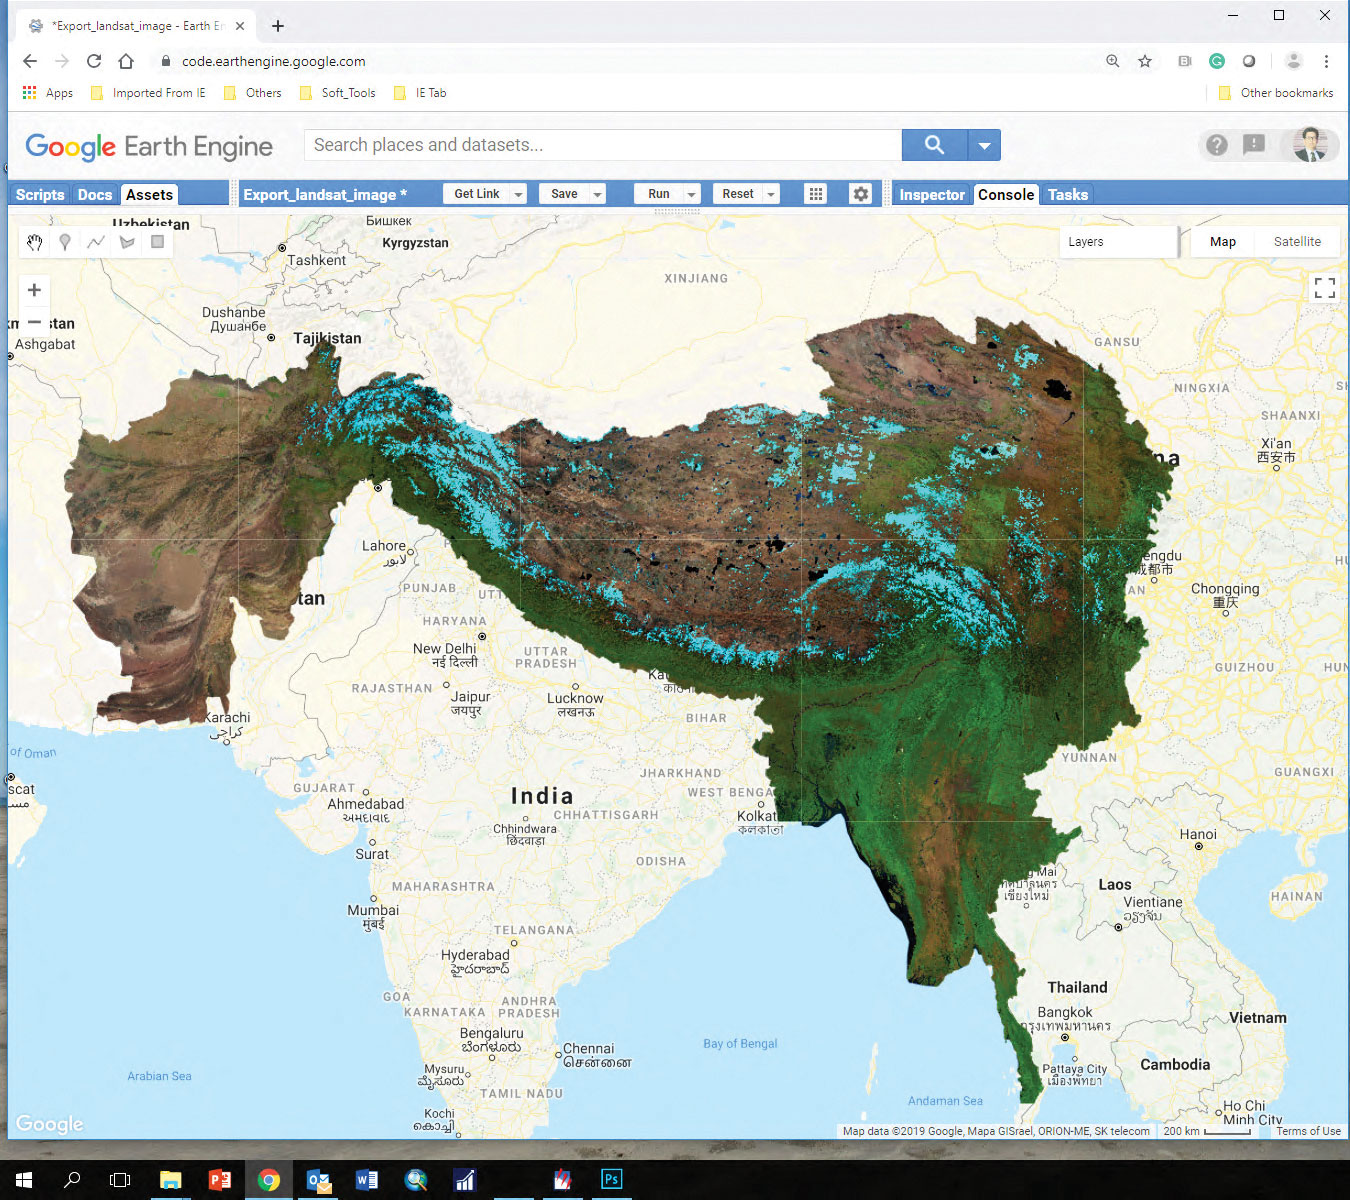 Mapping land cover